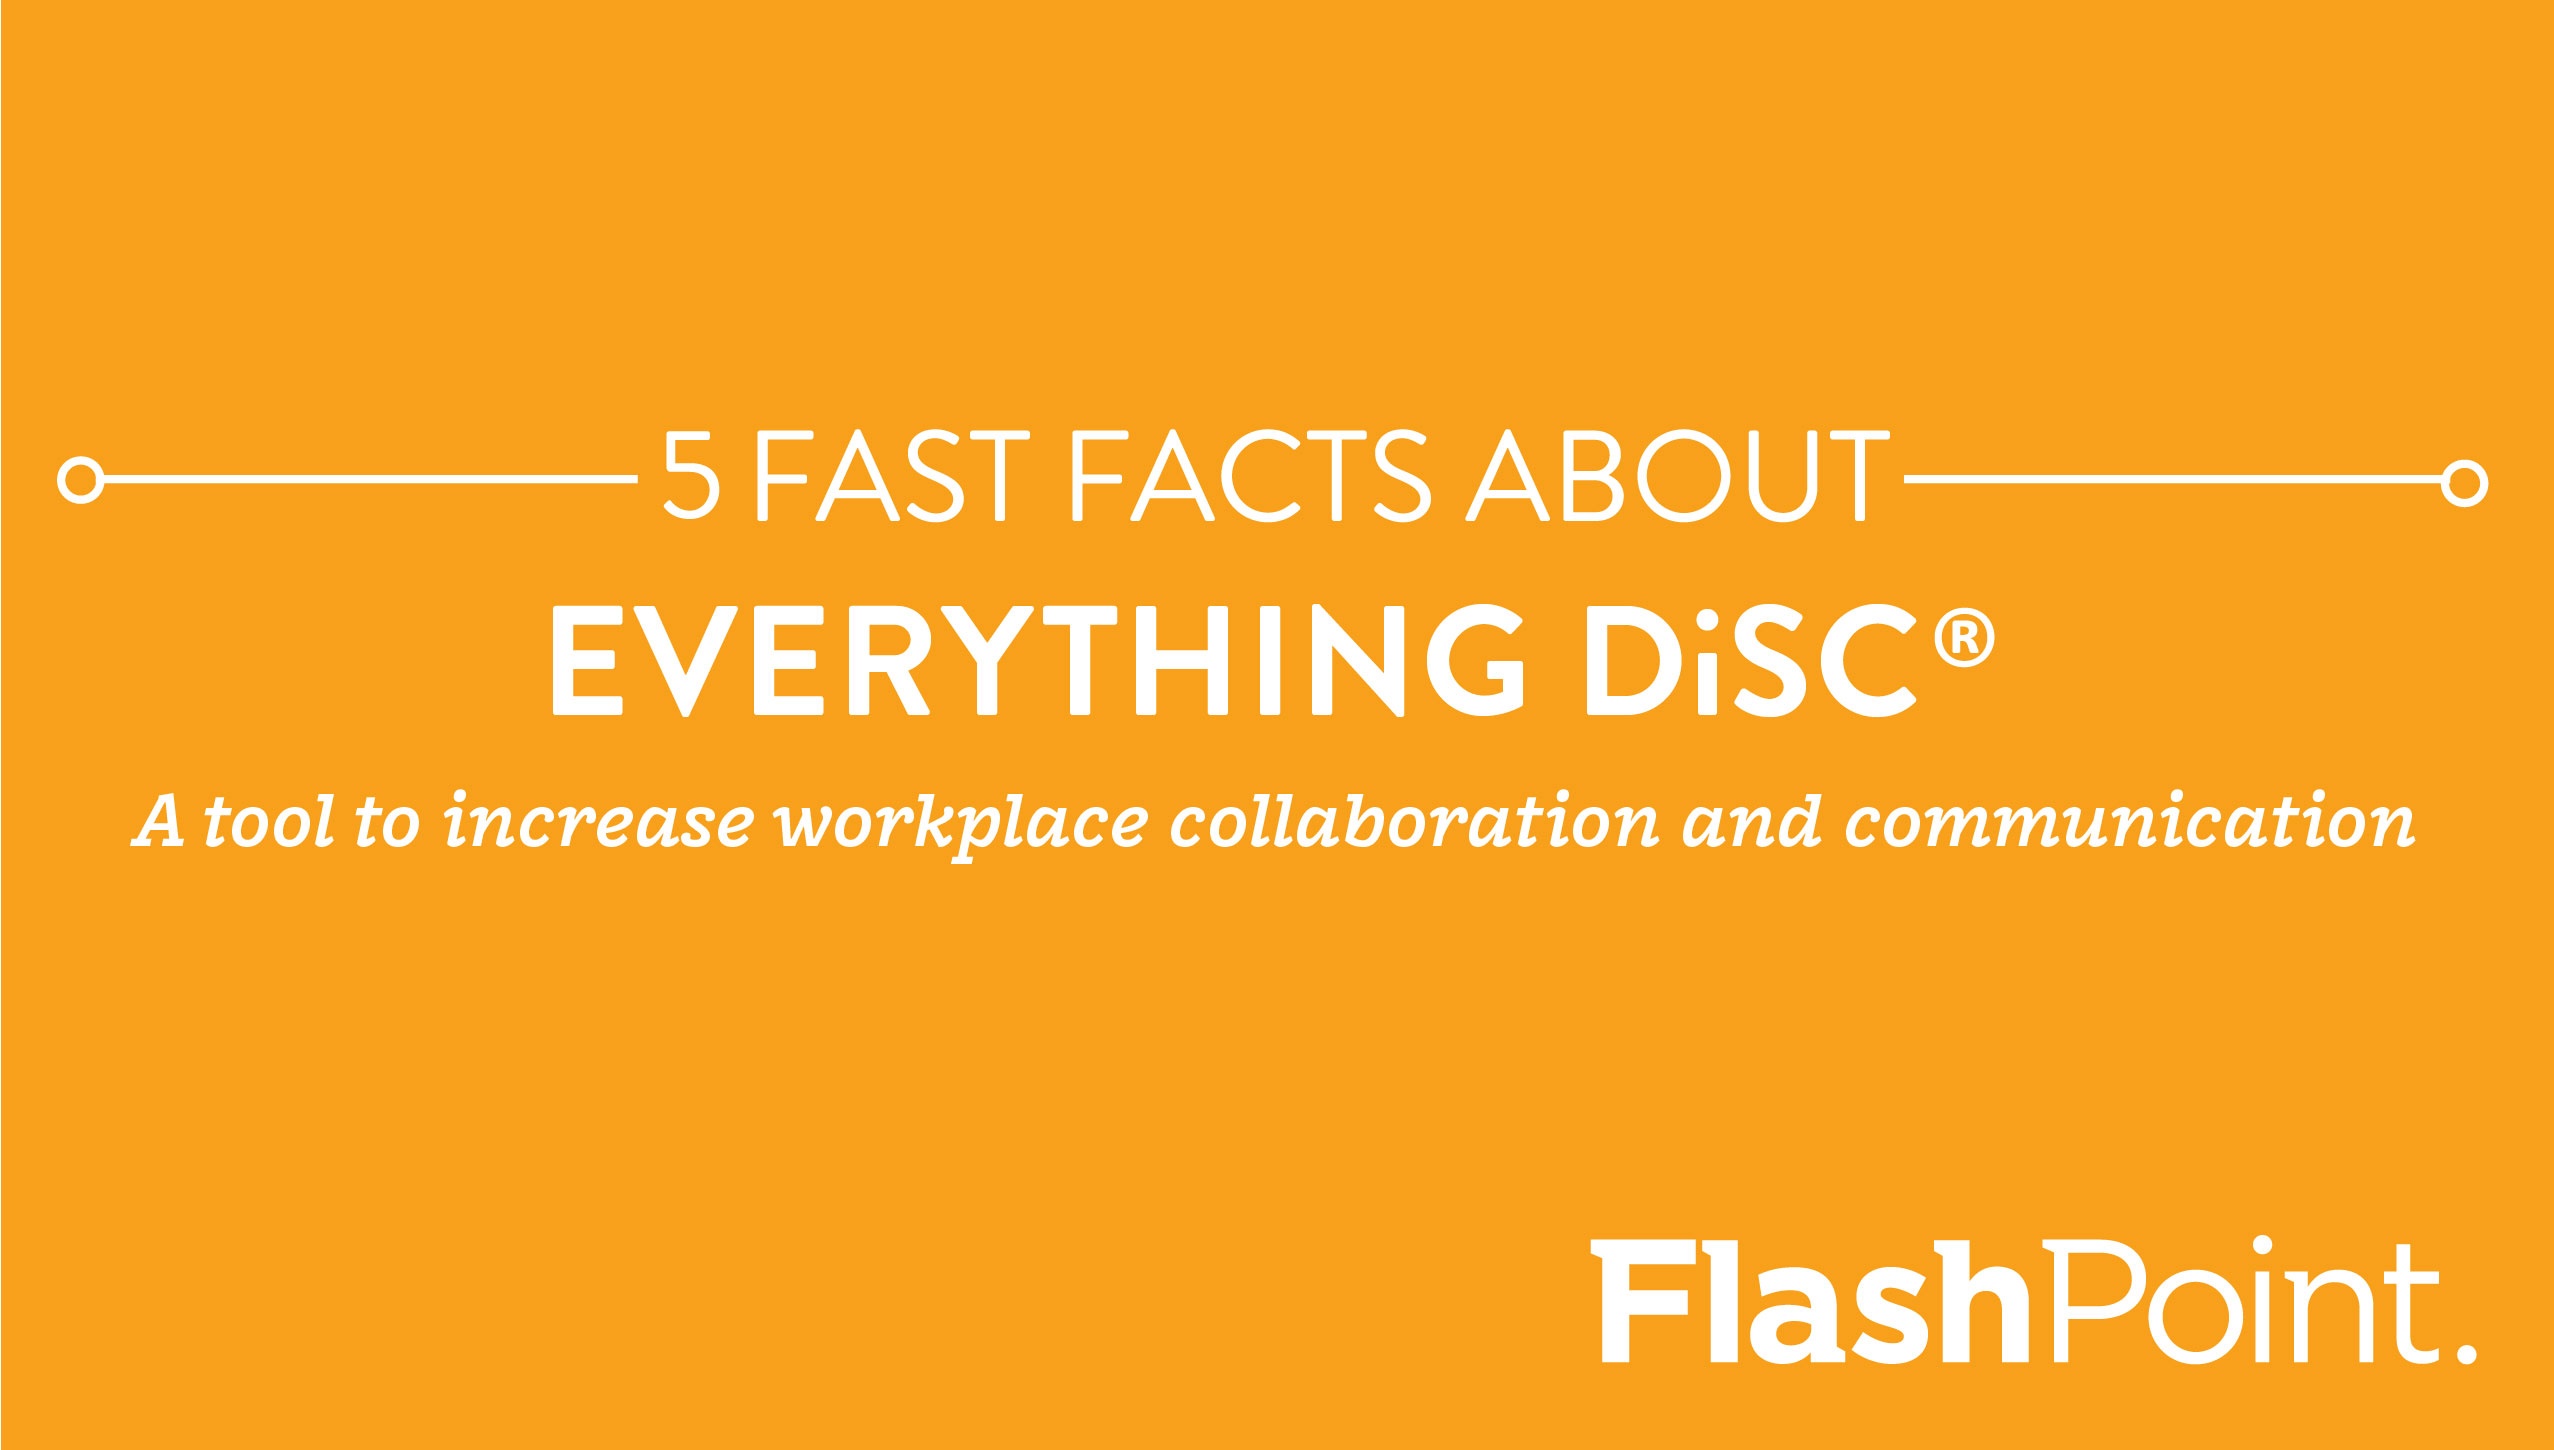 5 Fast Facts About Everything DiSC® [Infographic]